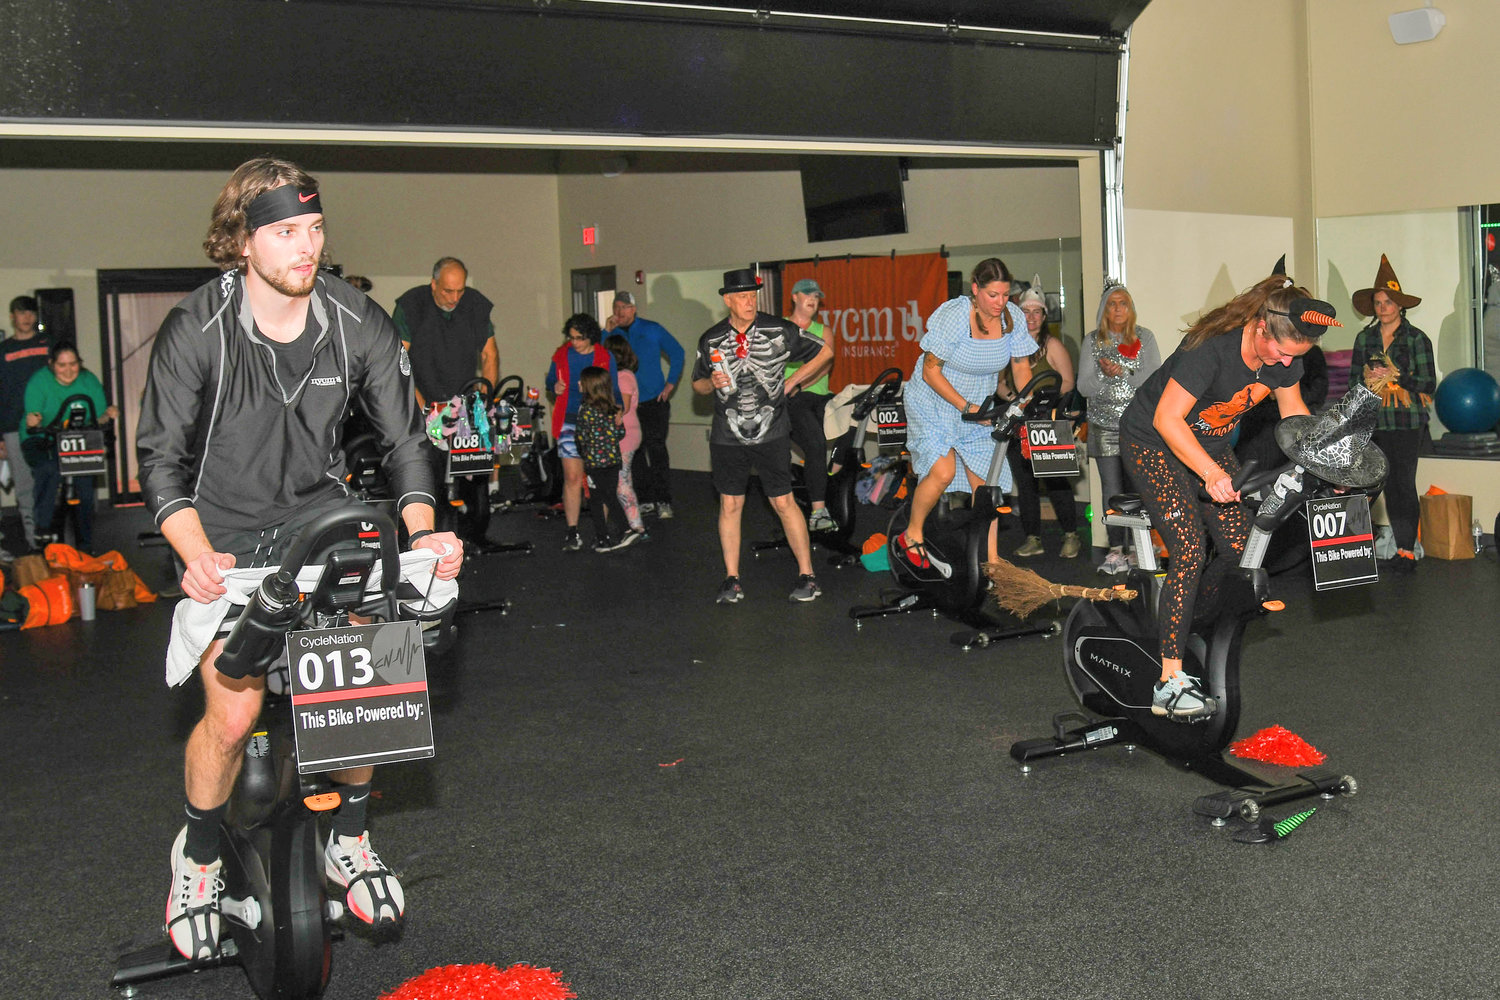 Guests participate in CycleNation, a relay-style, stationary cycling event that fights stroke on Thursday, Oct. 27 at Carbone Athletics at the Fitness Mill. Blood pressure screenings and health information were also available for participants.